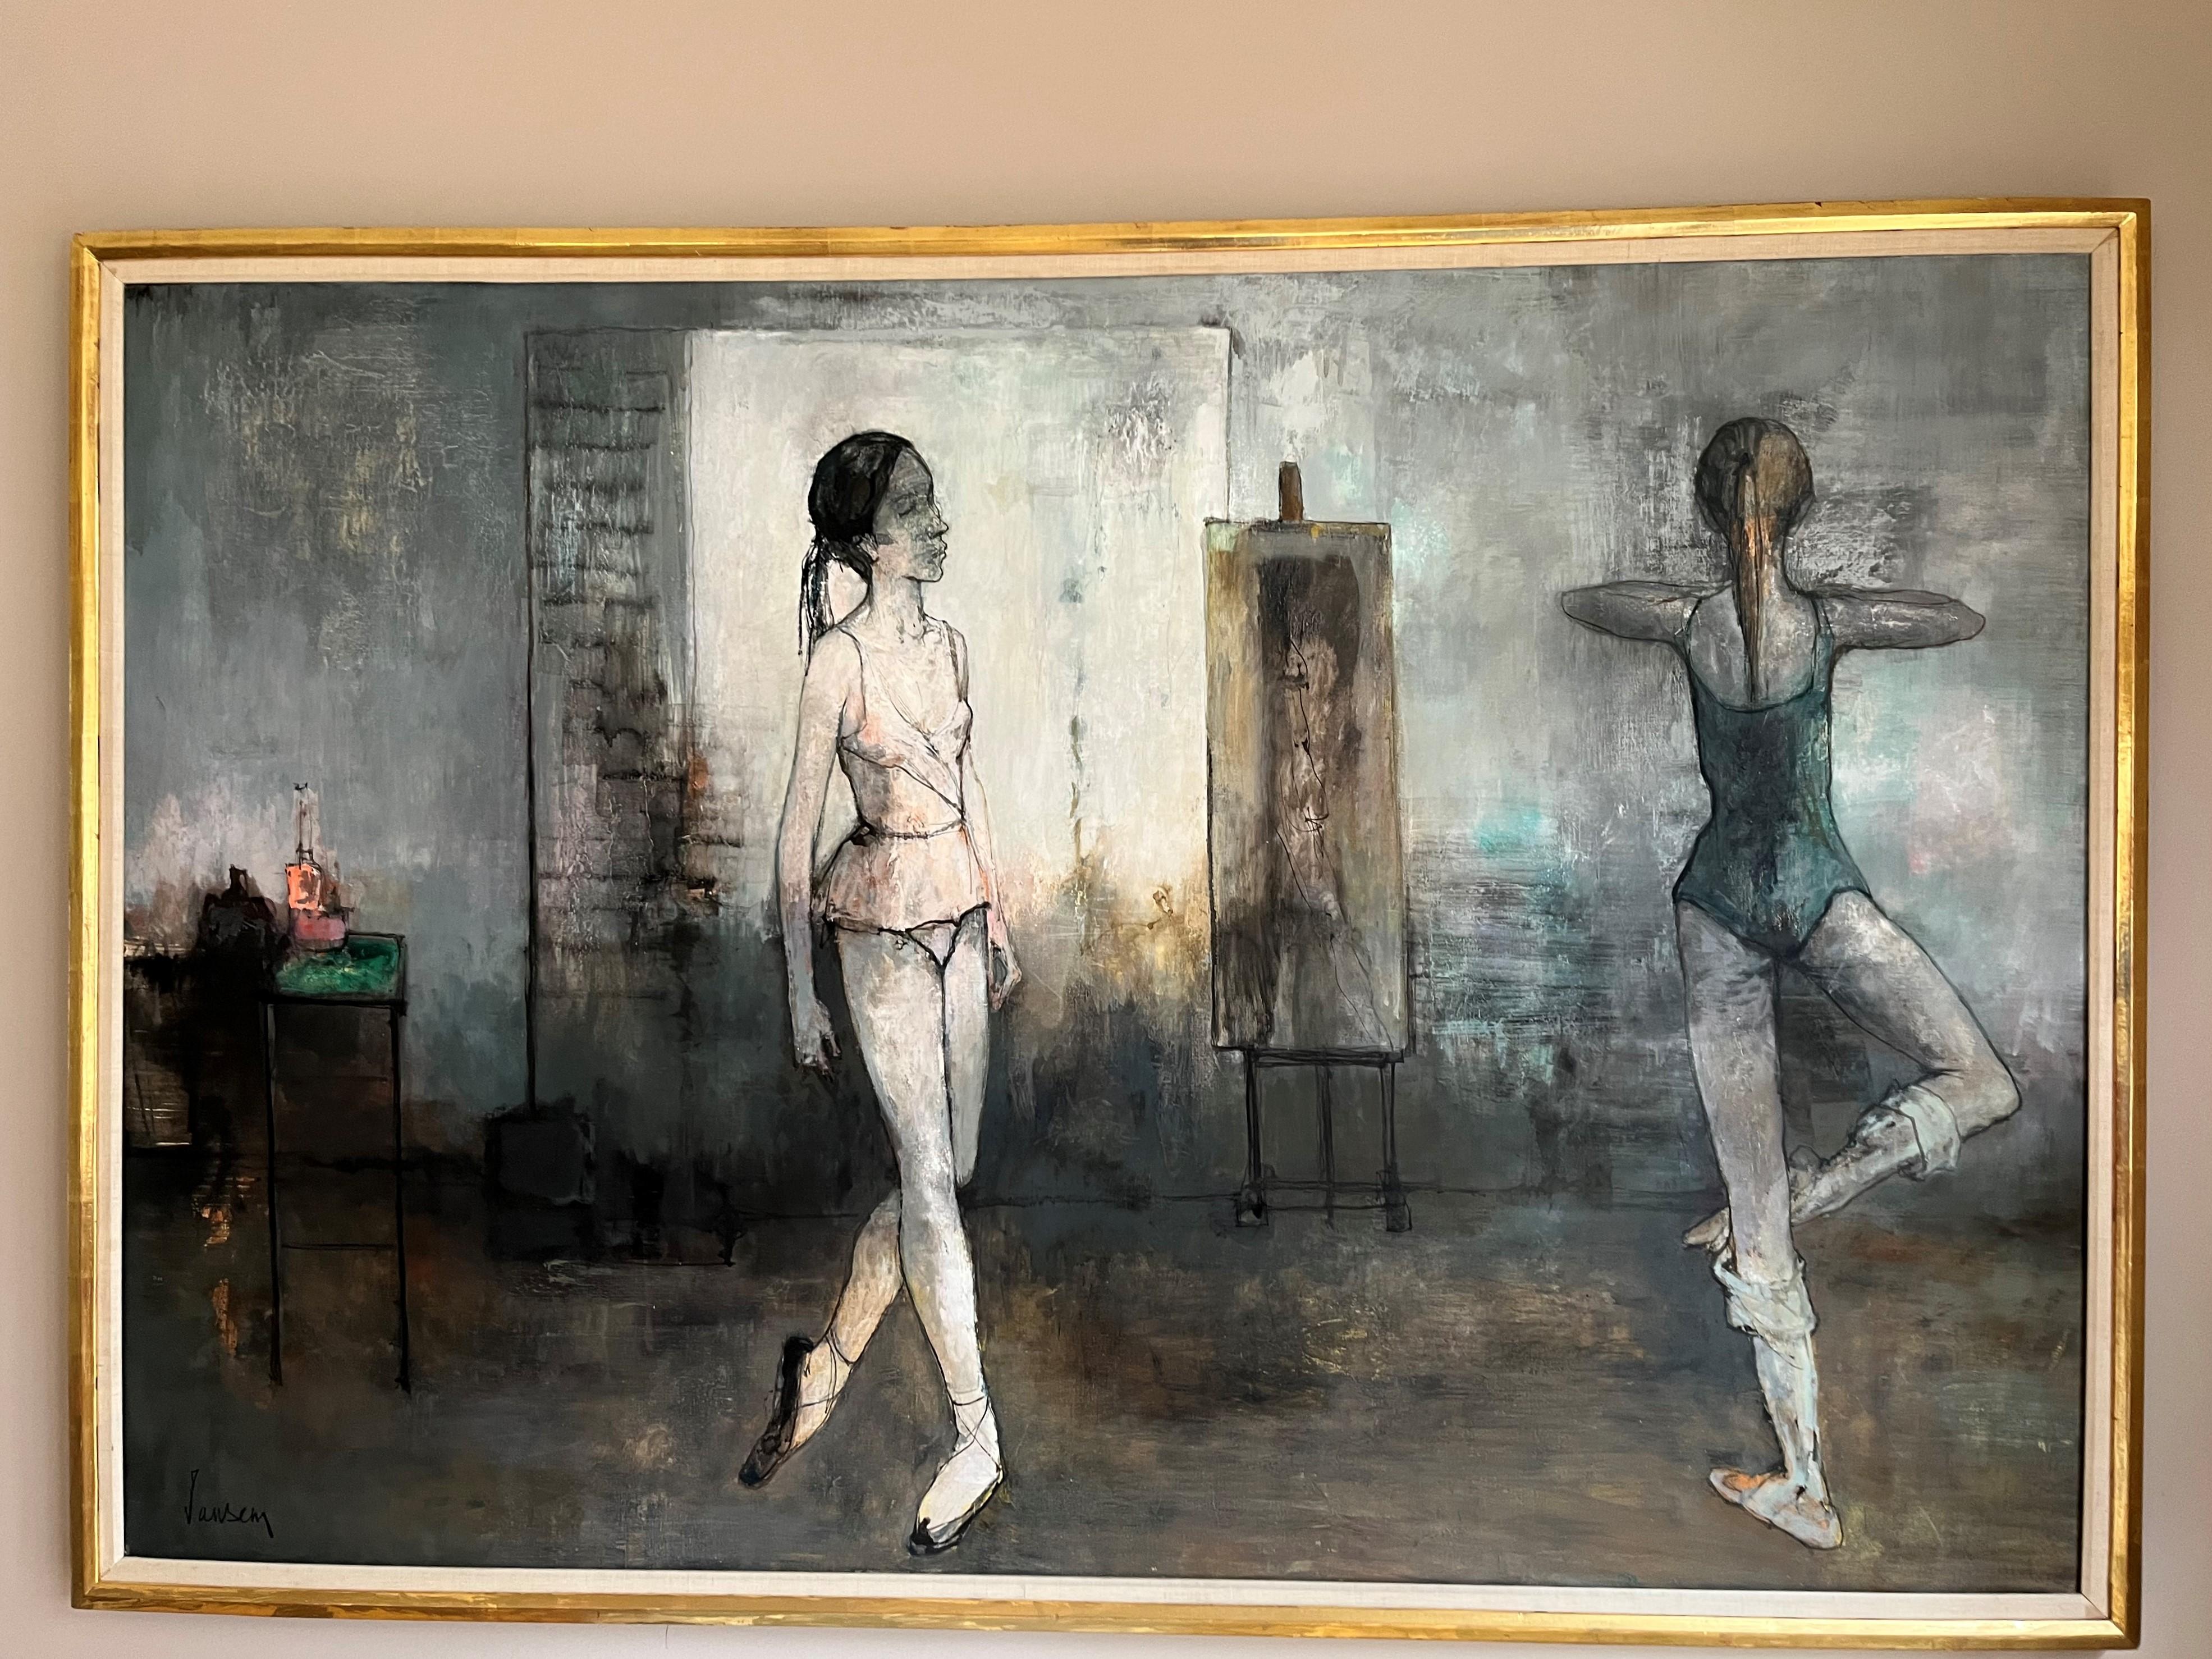 Dancers in the artists studio - Painting by Jean Jansem